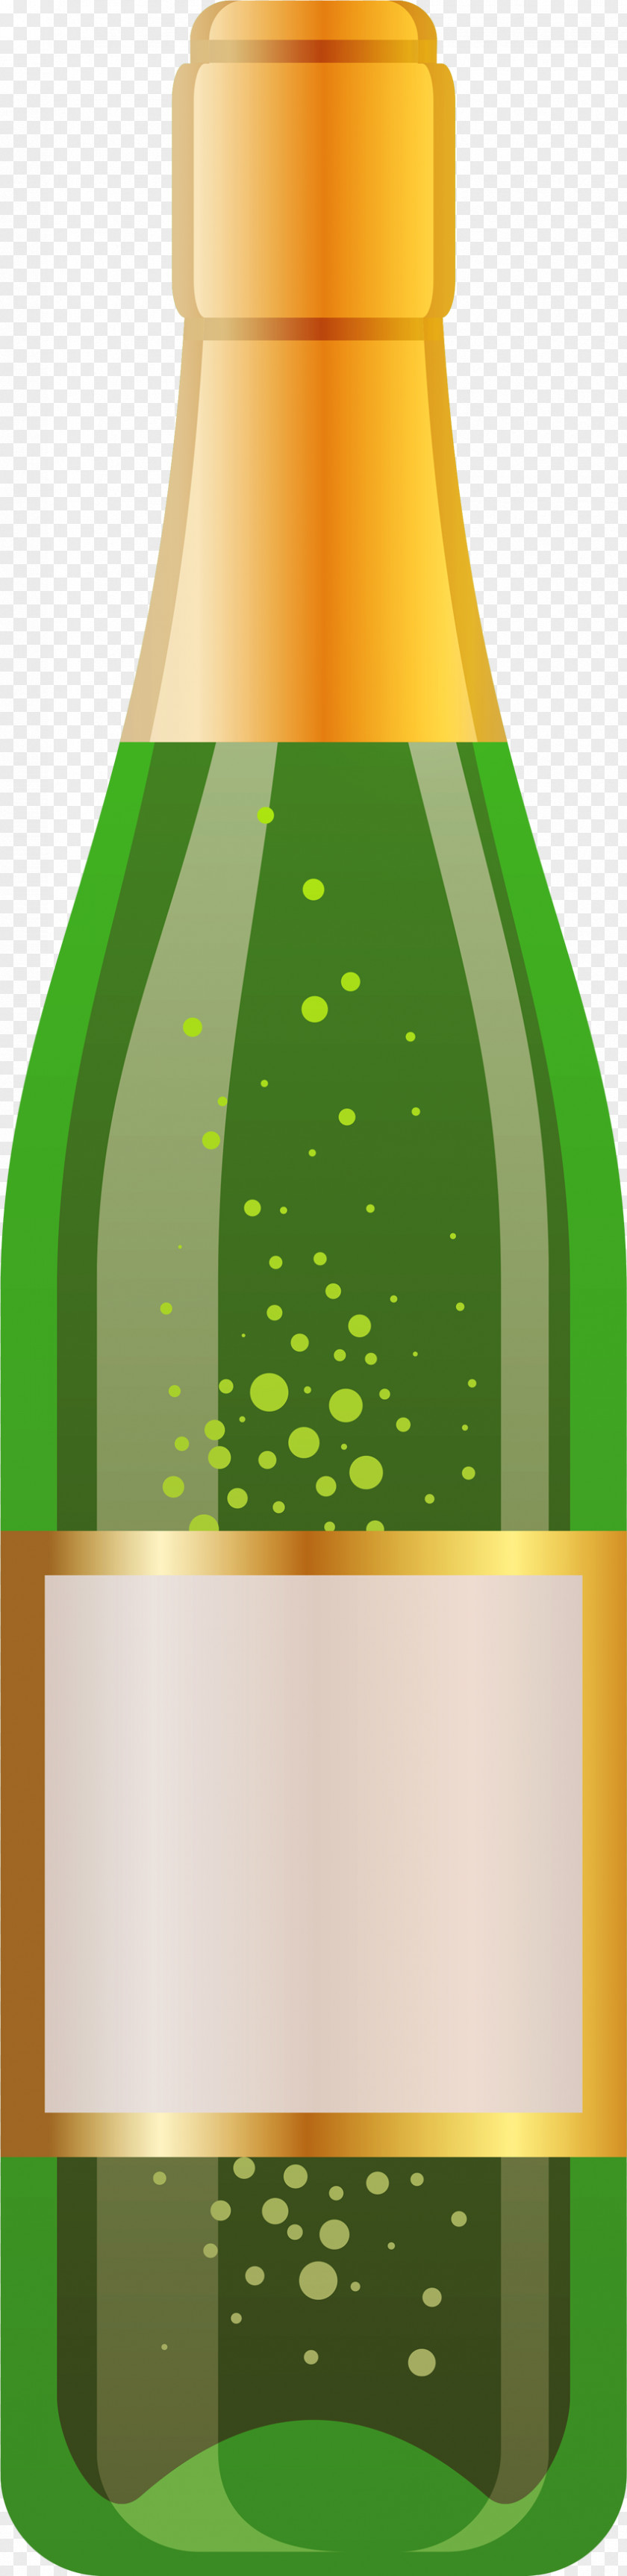 Wine Bottle Image Red White Champagne Beer PNG